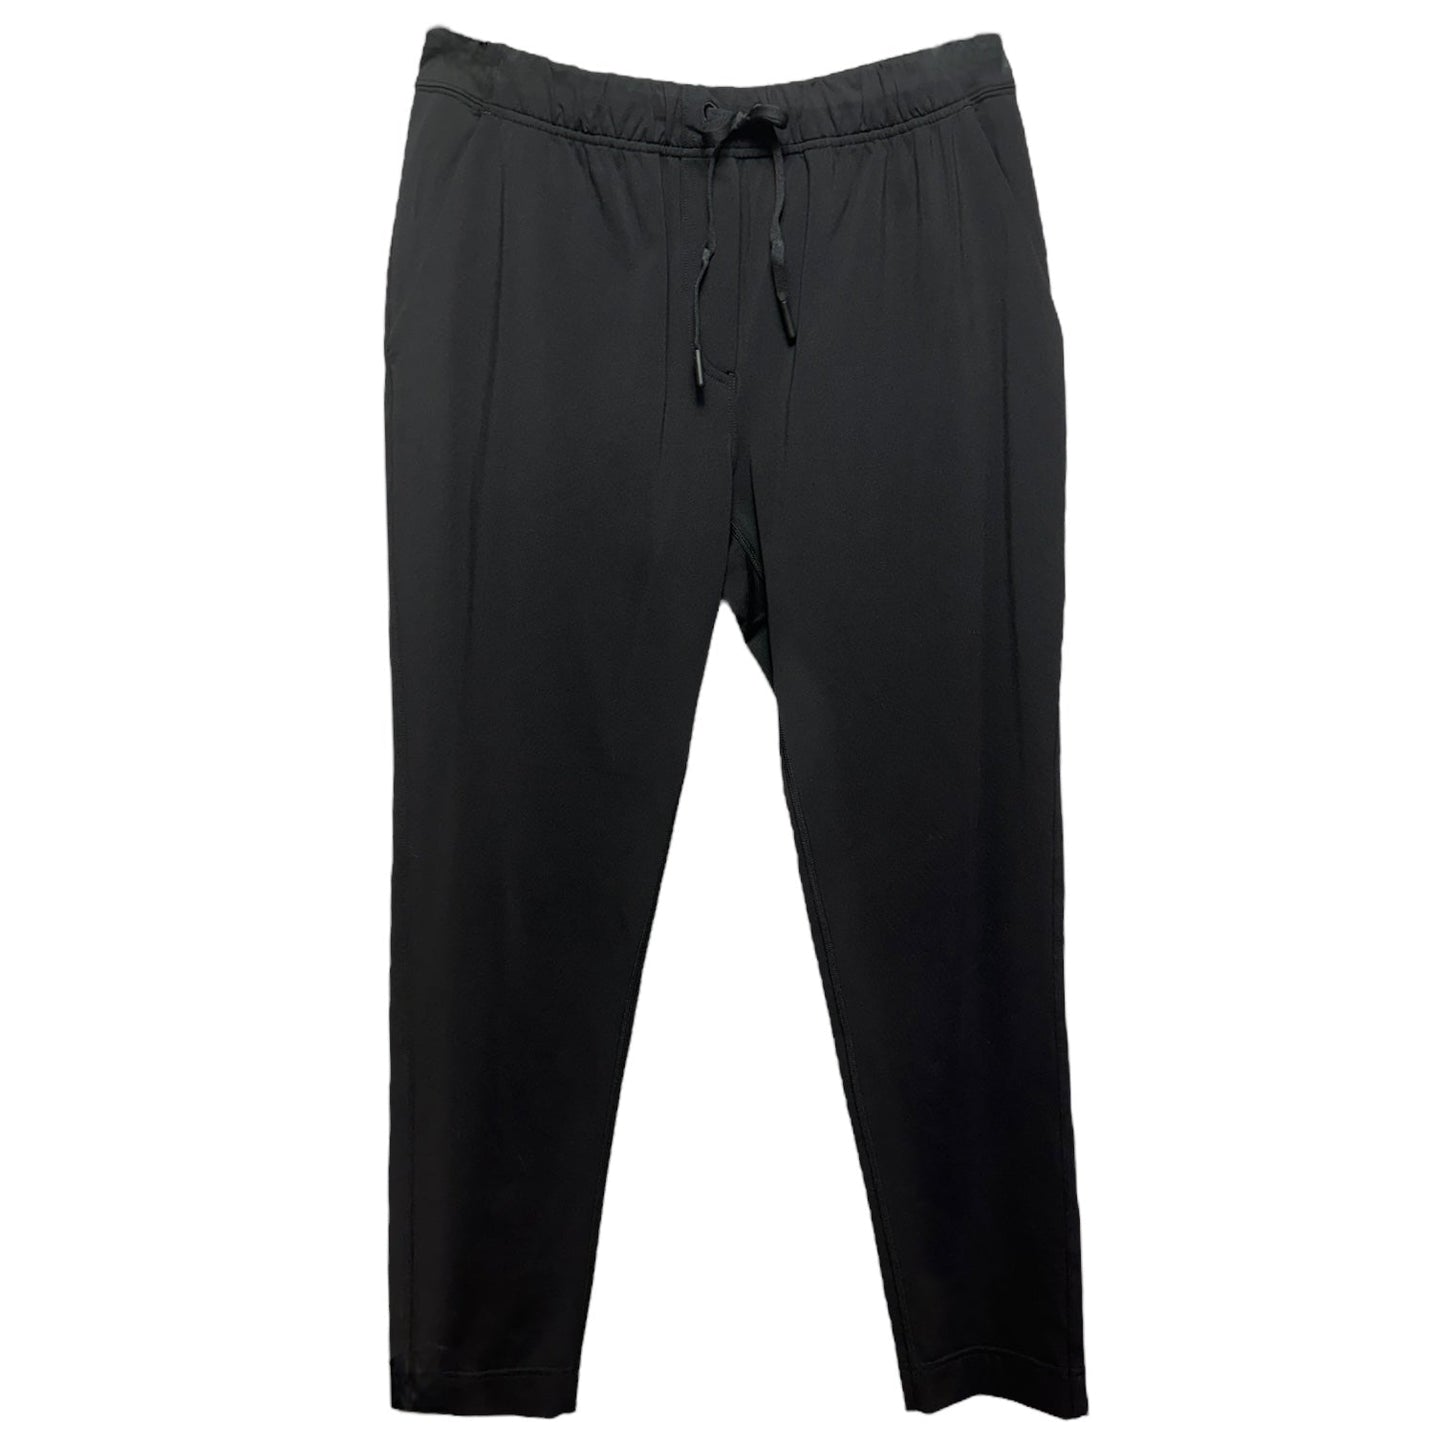 On The Fly Pant  By Lululemon  Size: 4